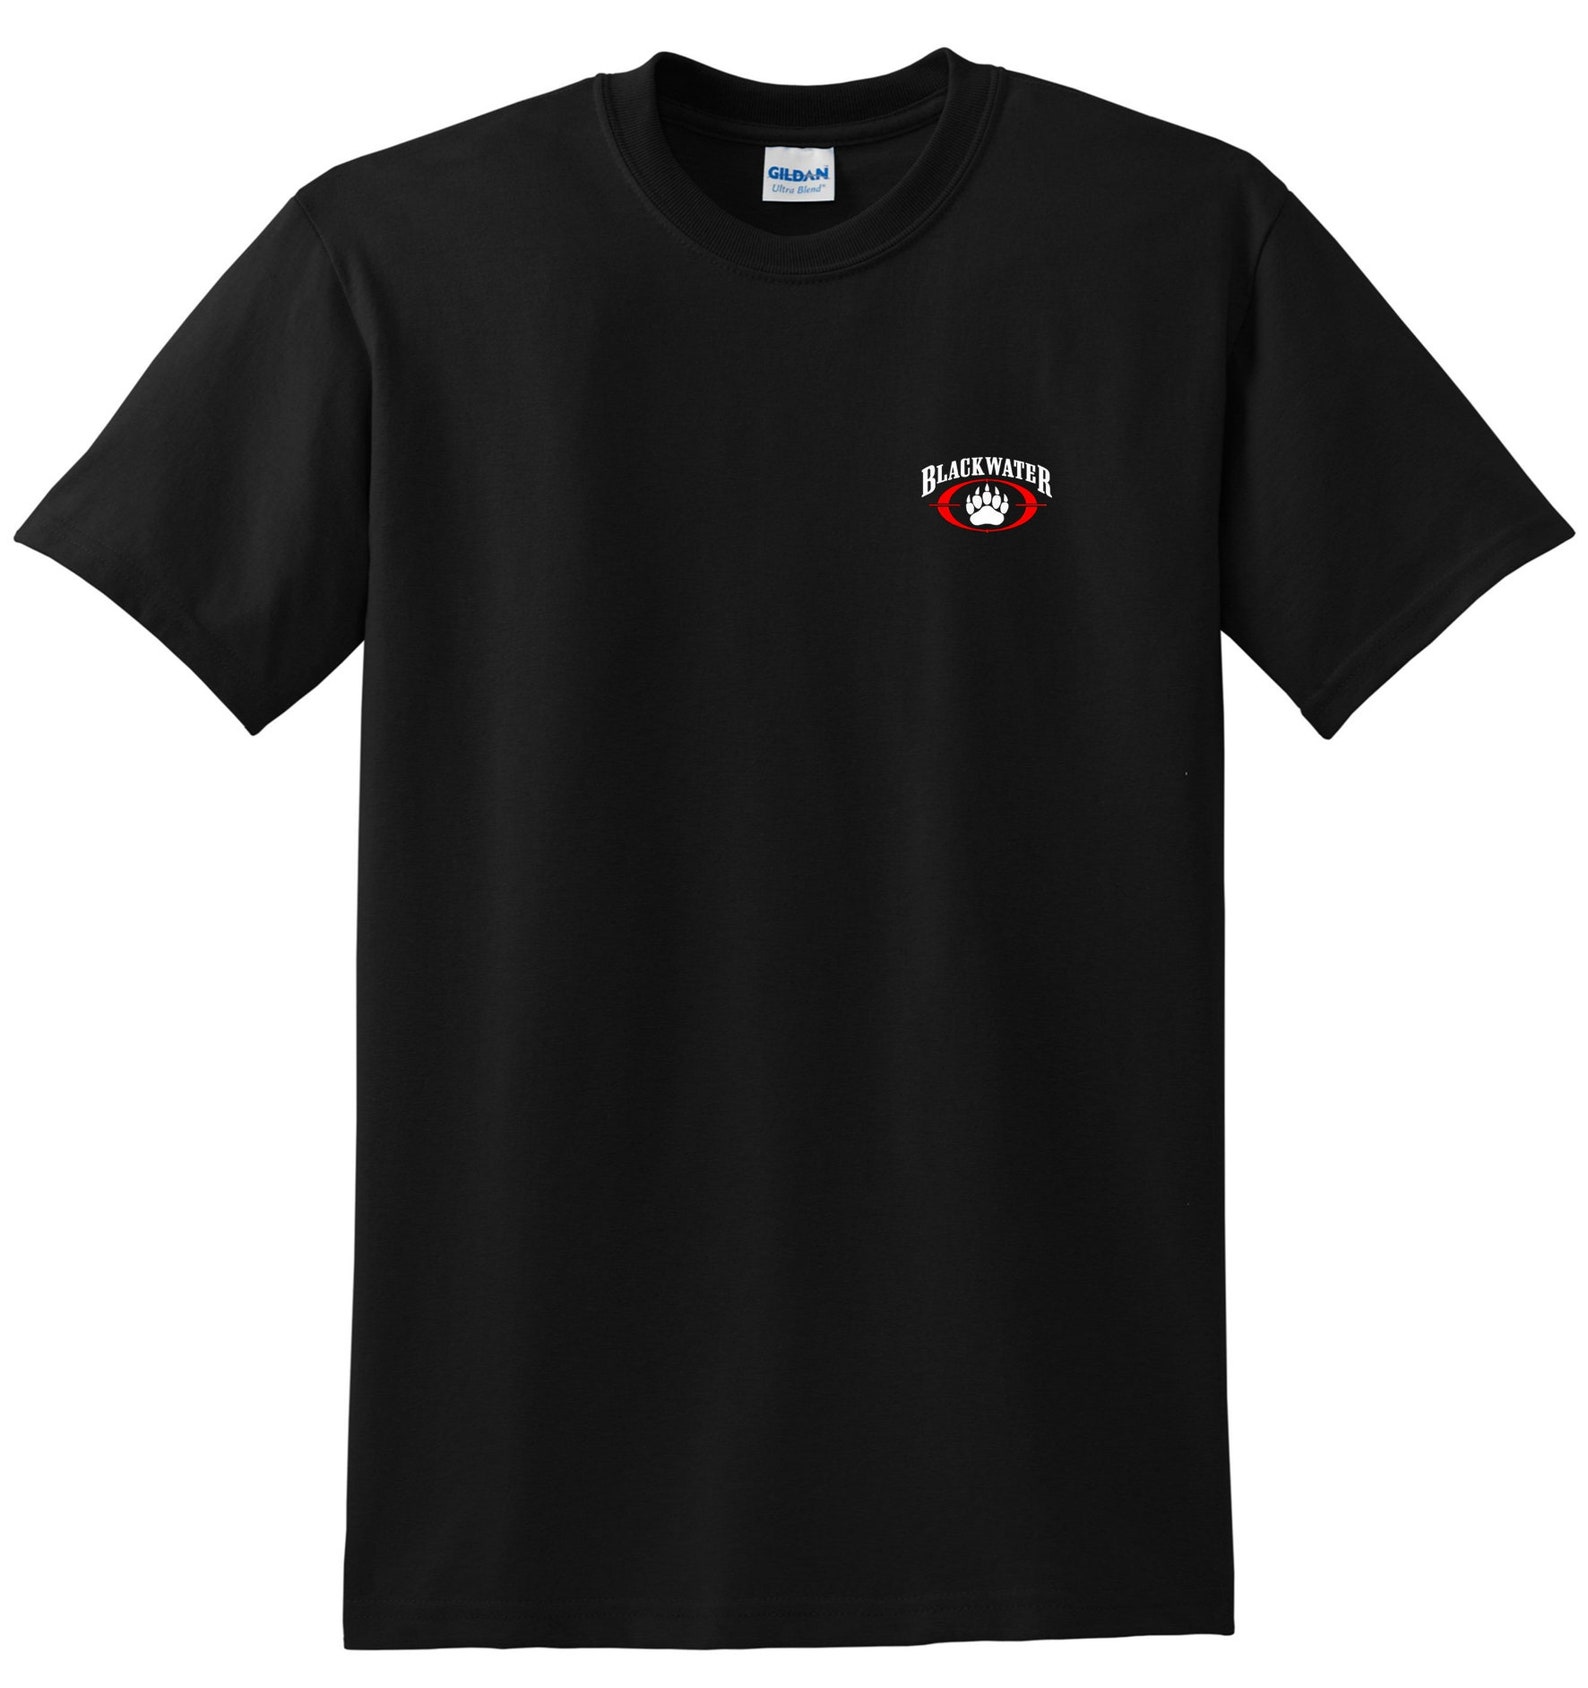 Blackwater T-shirt Famous Private Security Company Tee - Etsy